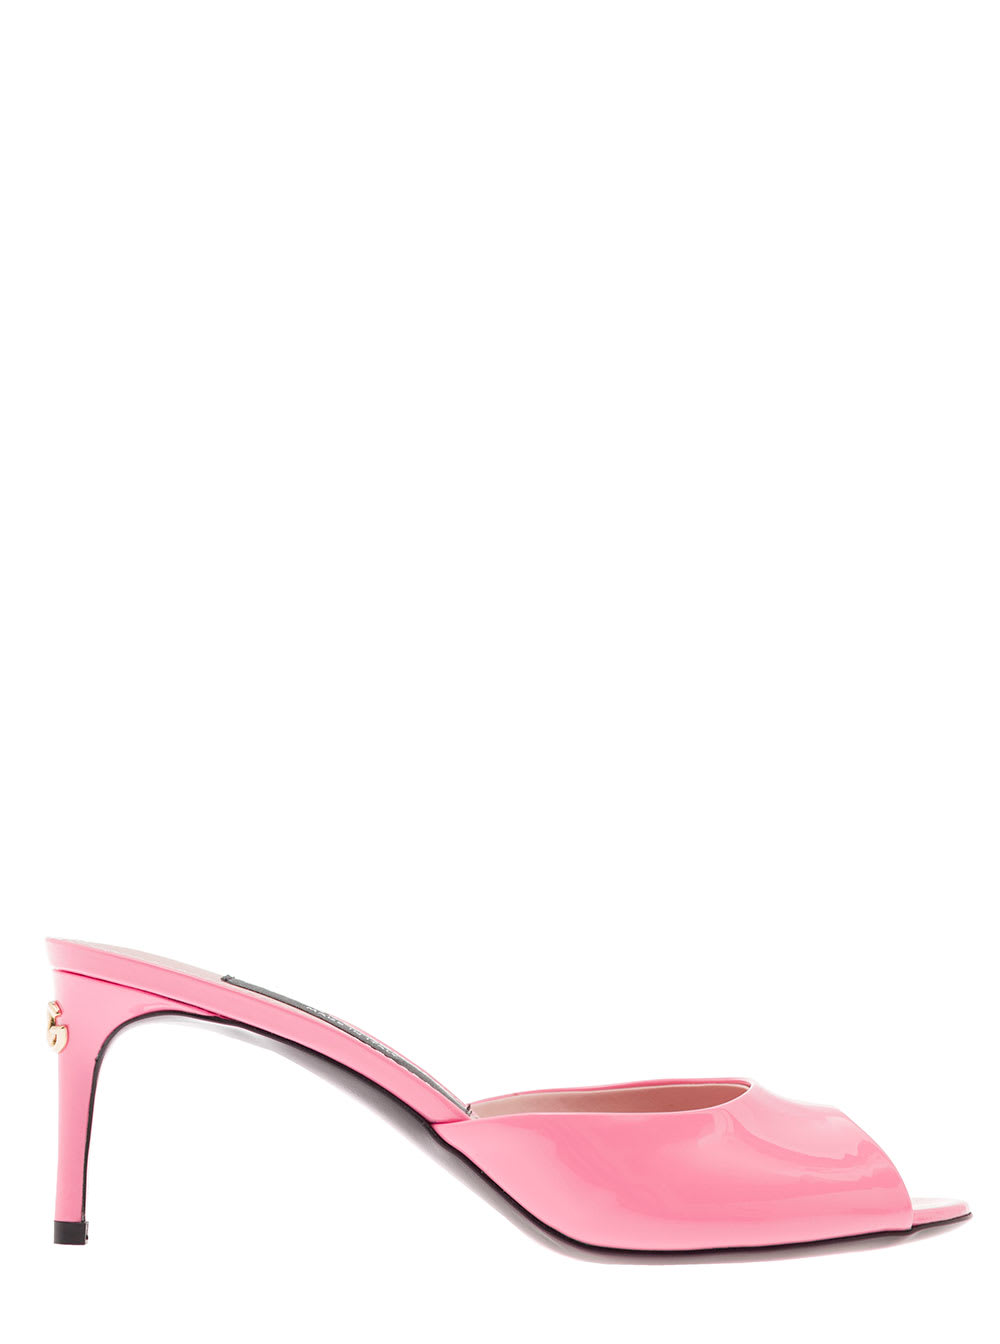 DOLCE & GABBANA PINK PATENT LEATHER MULES SANDALS WITH LOGO PLACQUE WOMAN